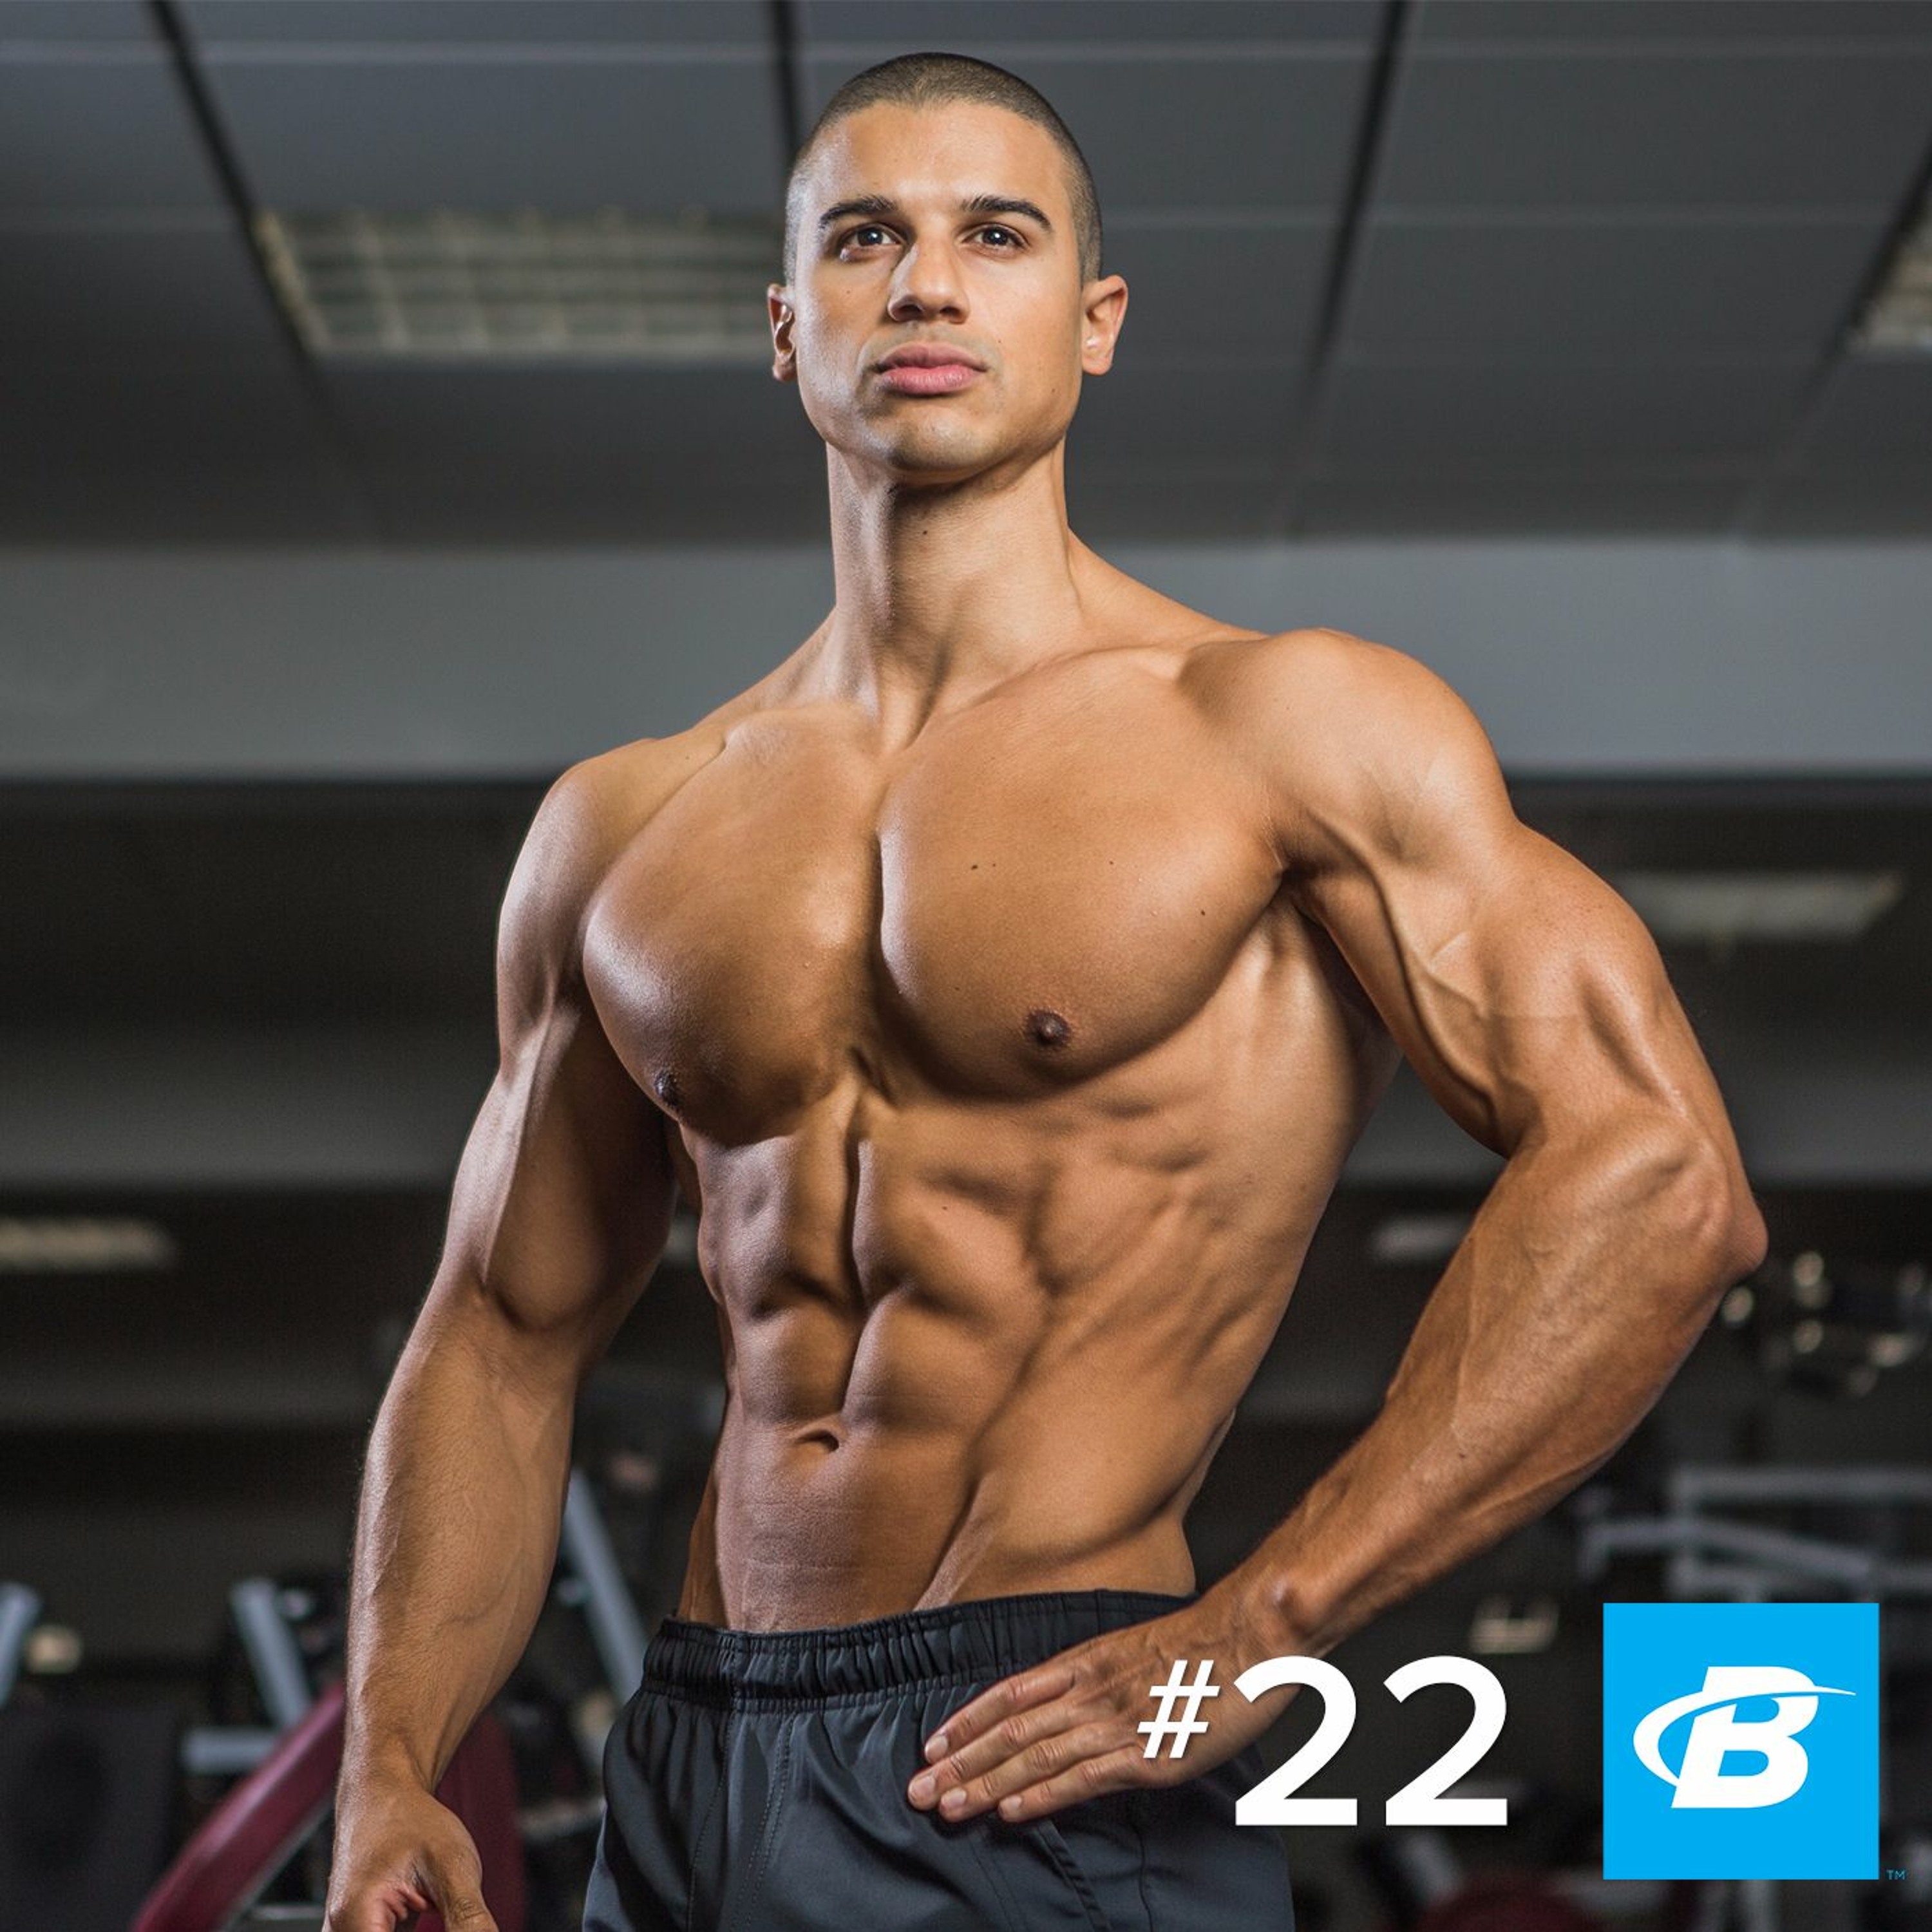 Episode 22: Lee Constantinou, The Relentless Competitor